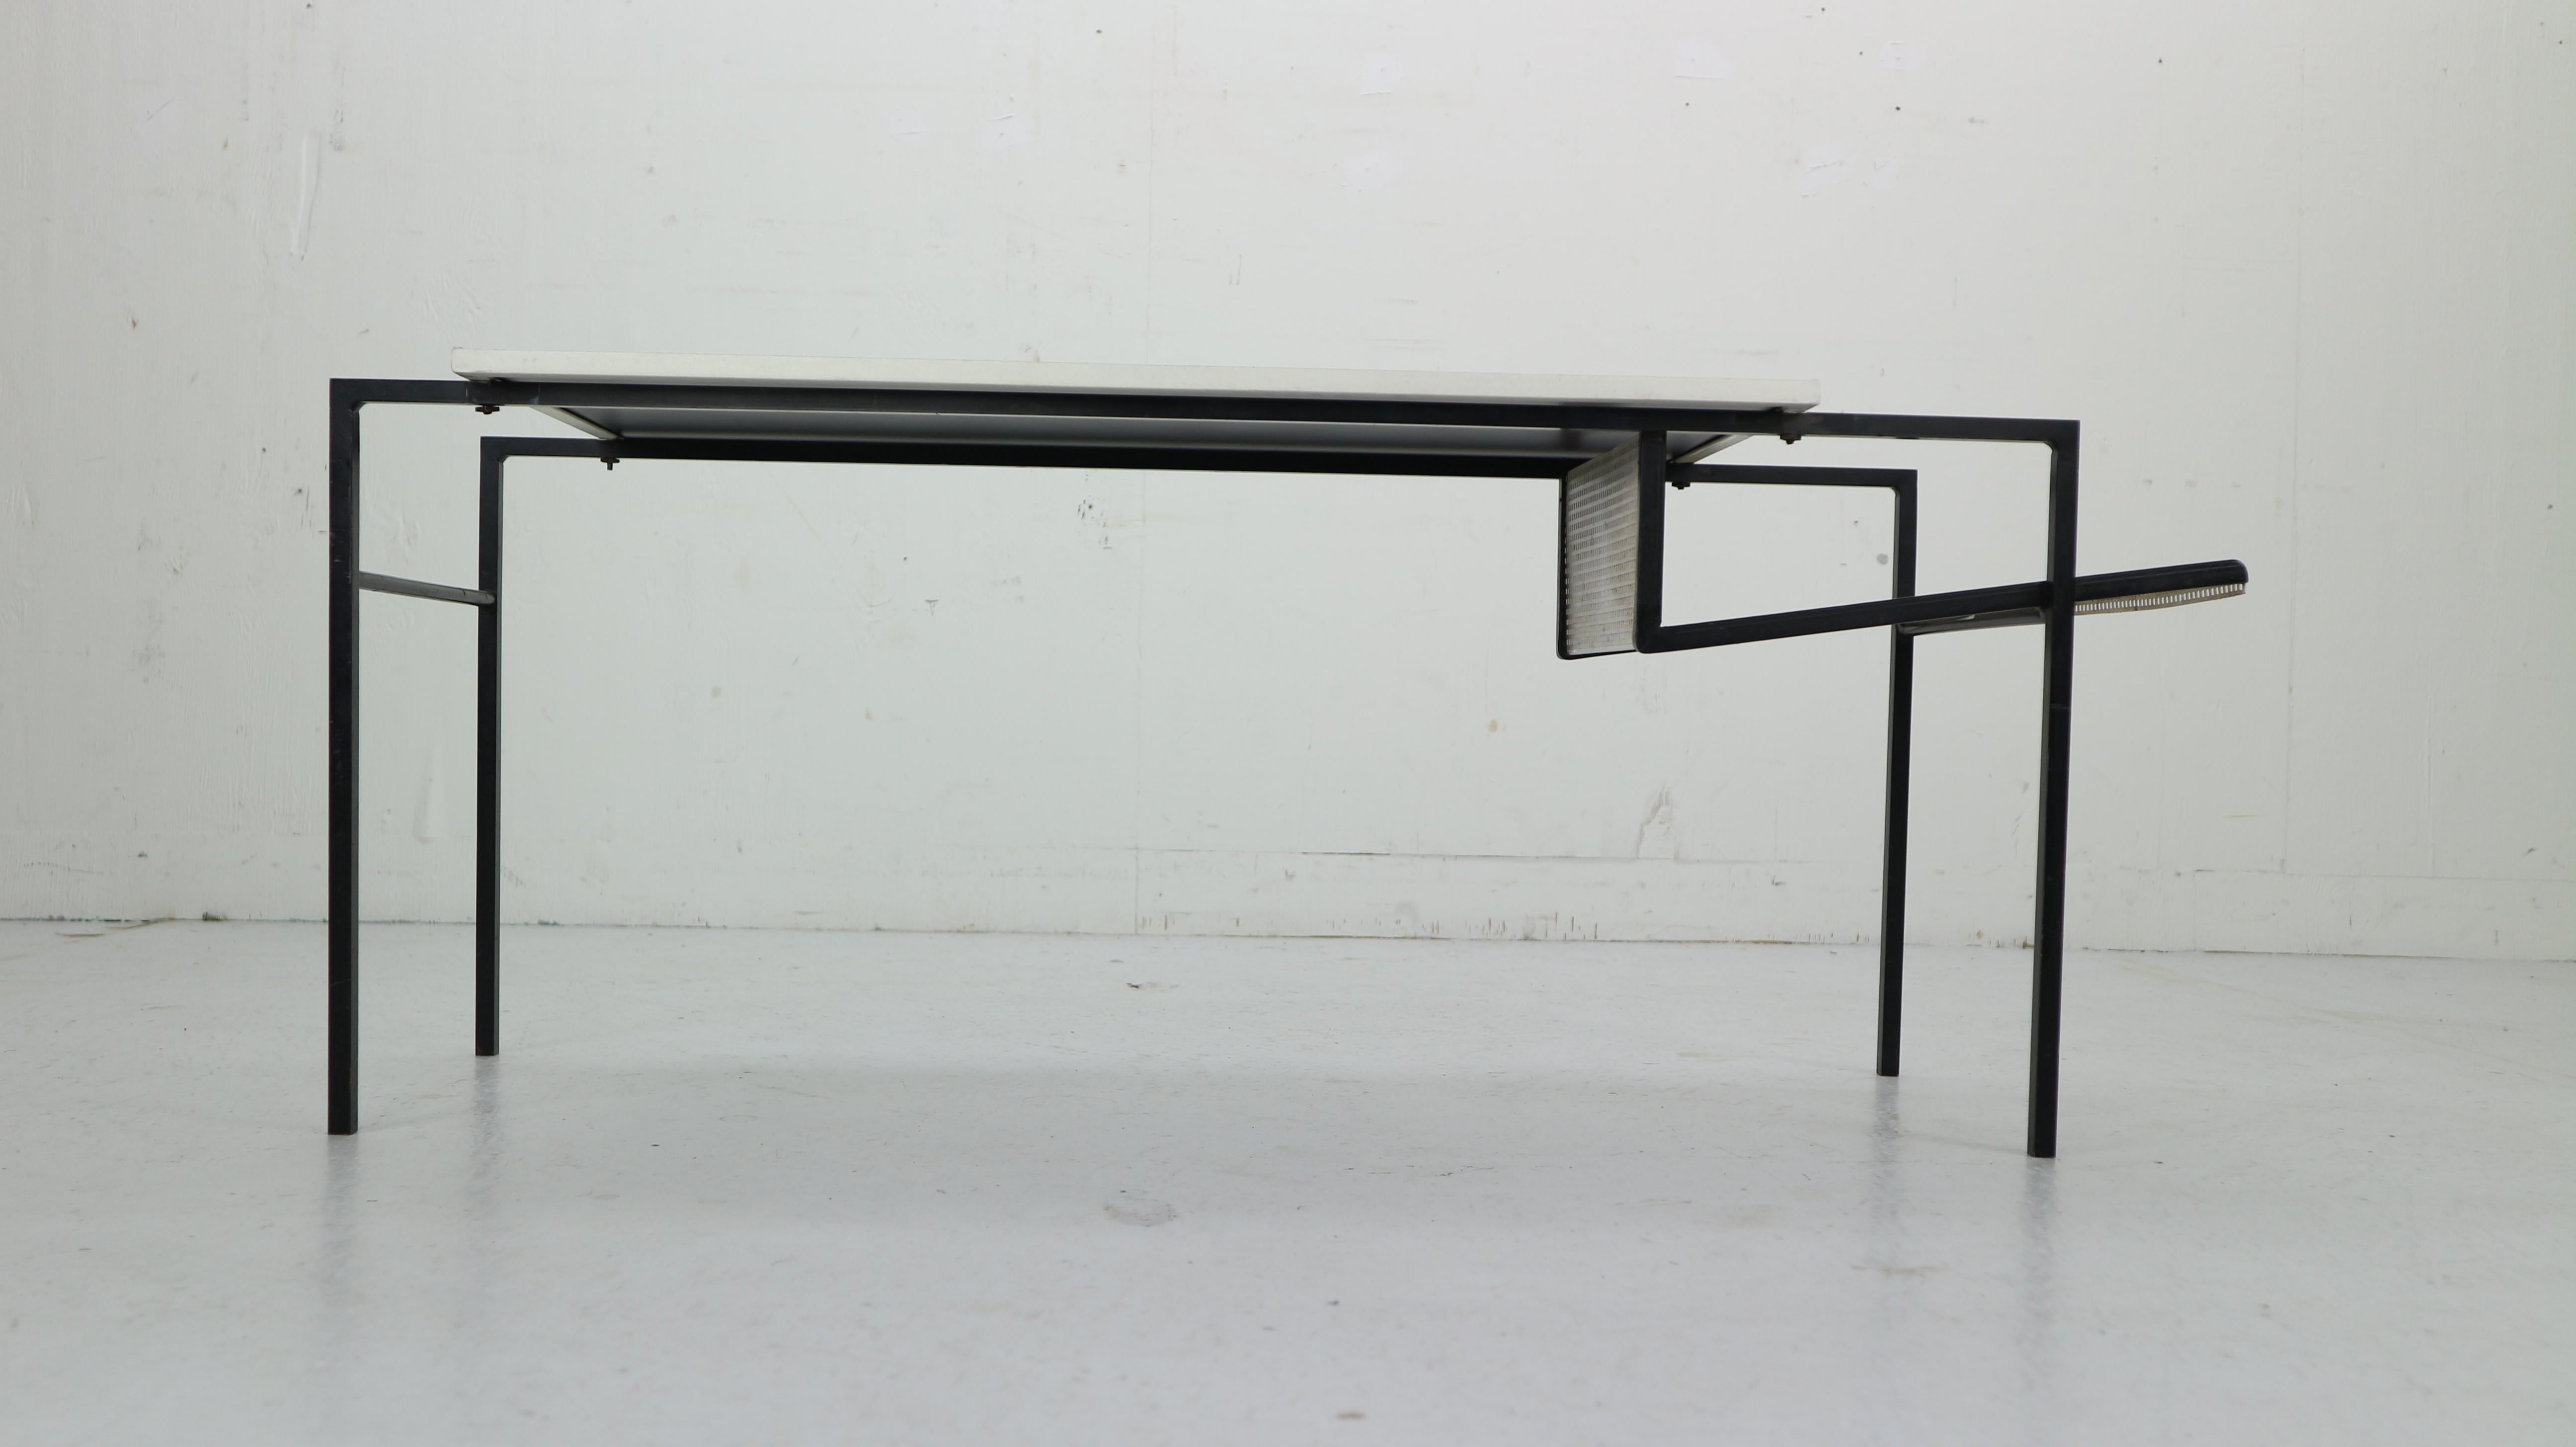 Coffee table or magazine table designed by Floris Fiedeldij for Artimeta Soest, Holland, 1955. This rare table has a solid steel frame, black lacquered. A black glass top and a die cut magazine rack. The table is in original condition. A fantastic